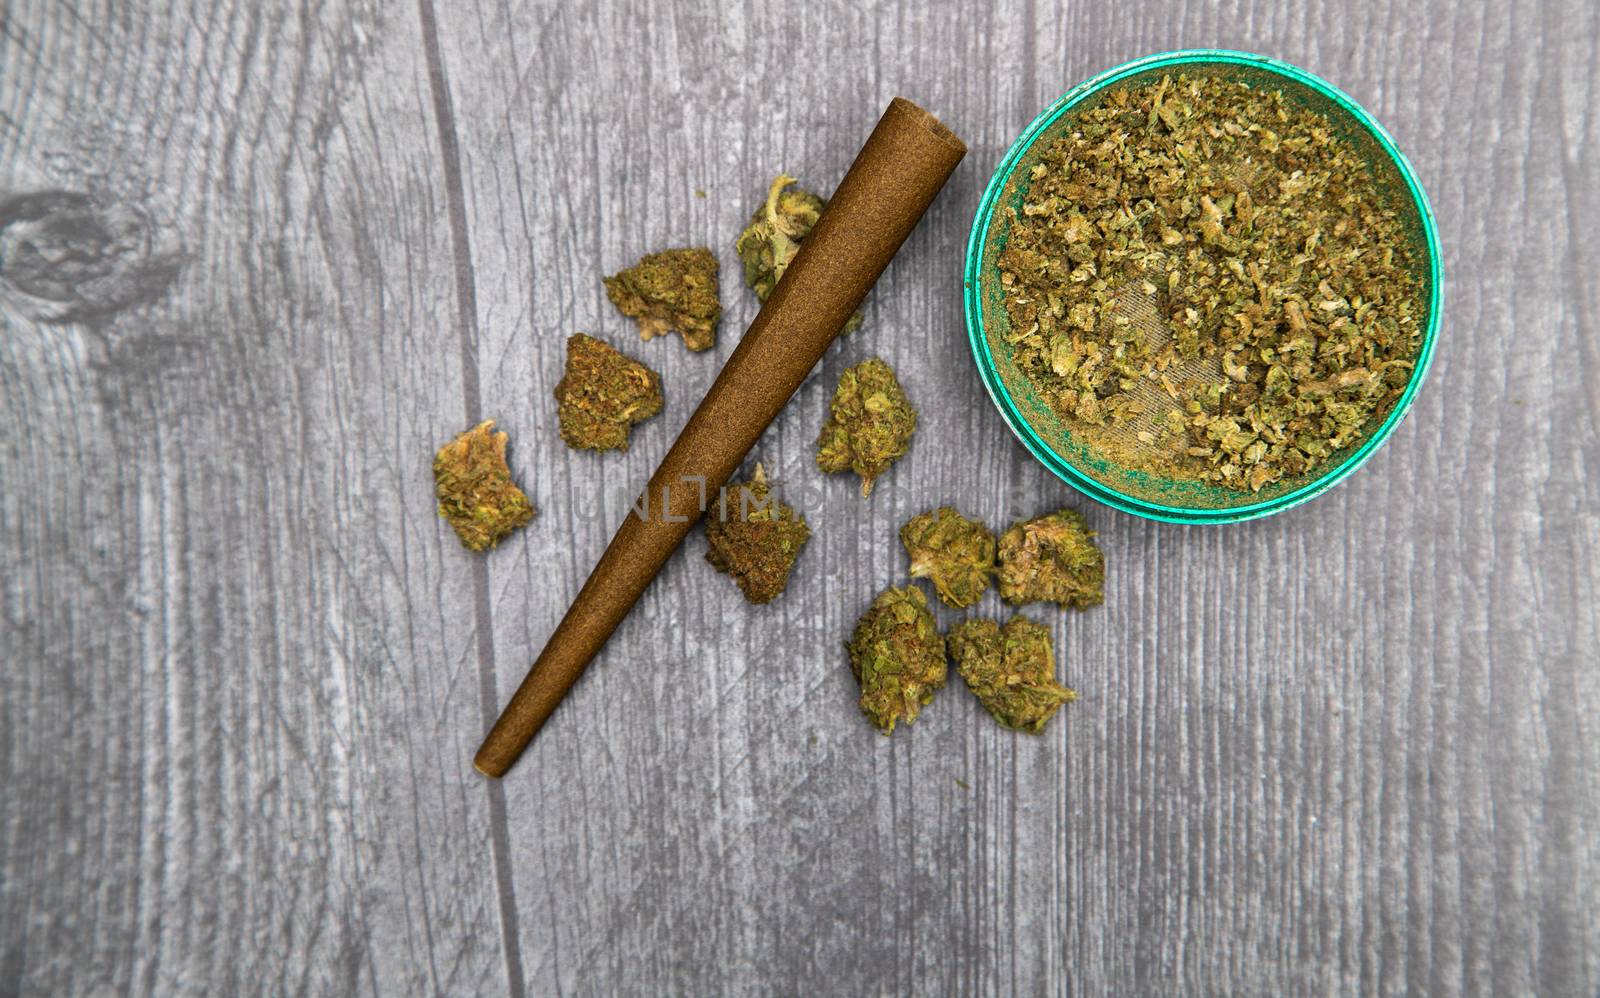 Large green buds of medical marijuana sit on a wooden table with a hemp wrap and grinder.